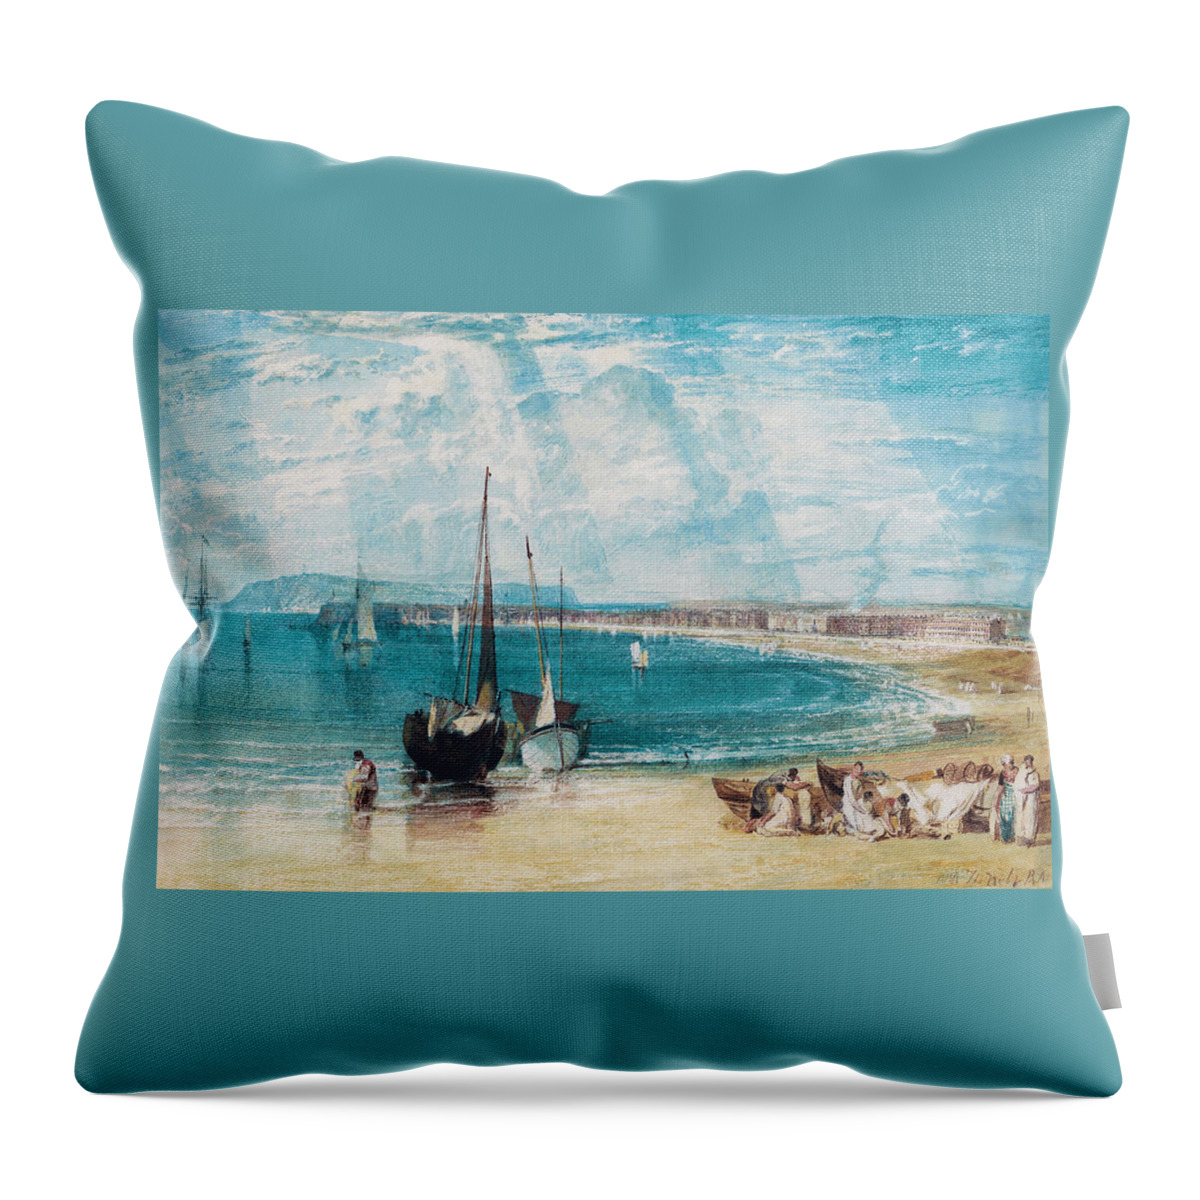 Weymouth Throw Pillow featuring the painting Weymouth by JMW Turner 1811 by J M W Turner